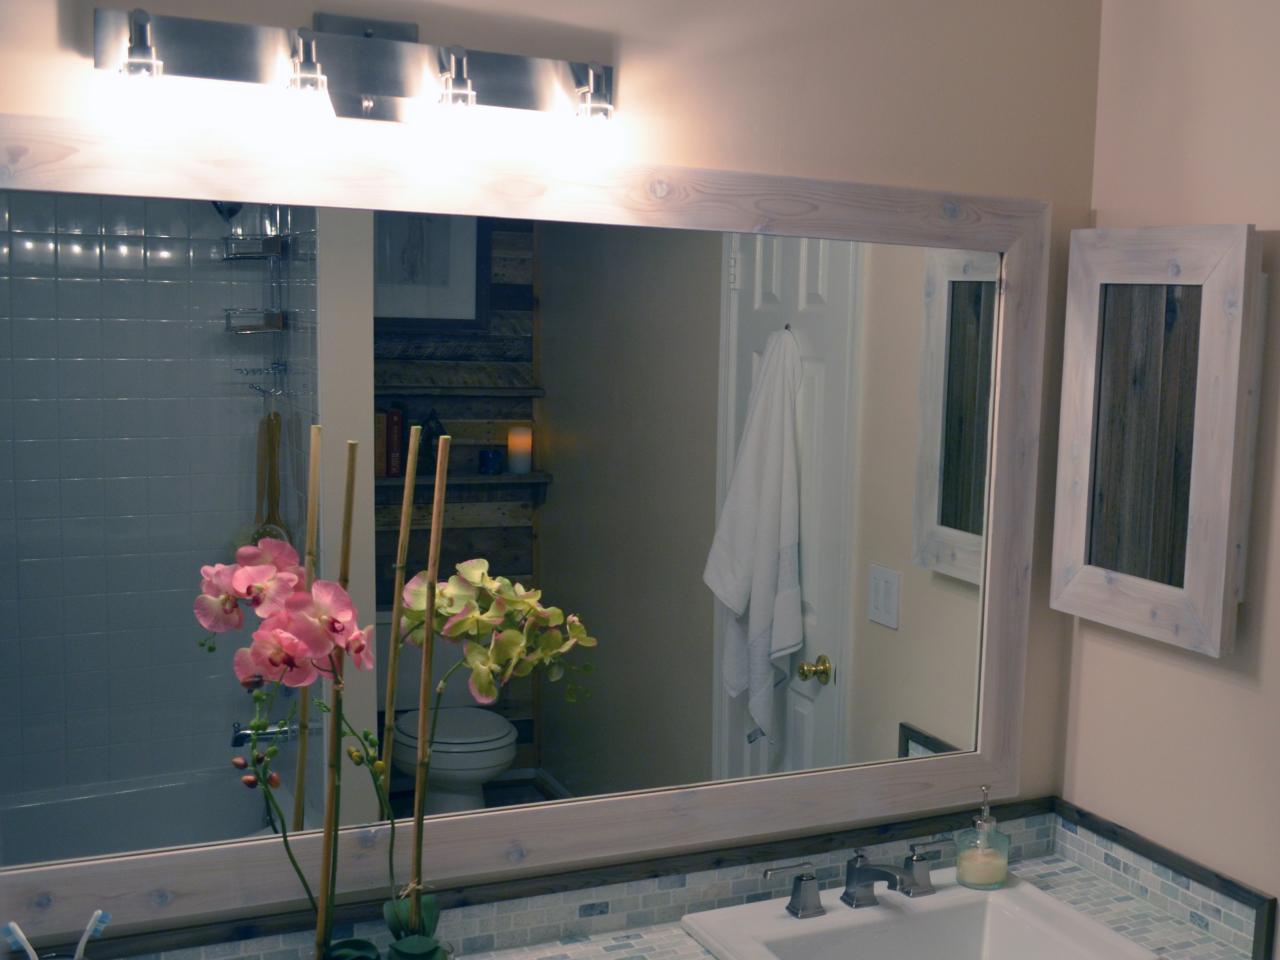 How To Replace A Bathroom Light Fixture, How To Change Led Bulb In Bathroom Mirror